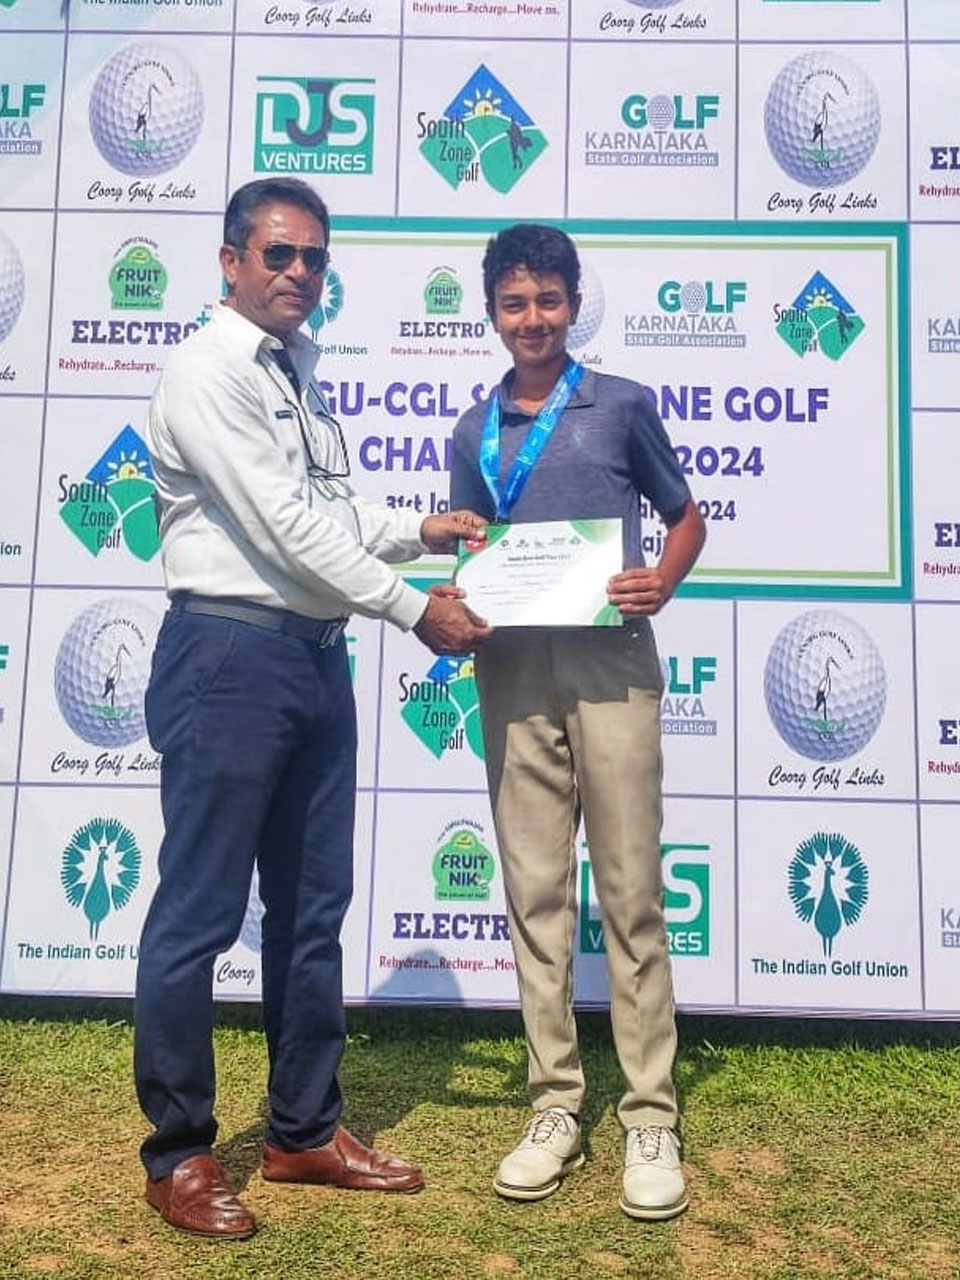 Shayaan Khadri finishes as Runner Up in Open Amateur Category at IGU Coorg Golf Links